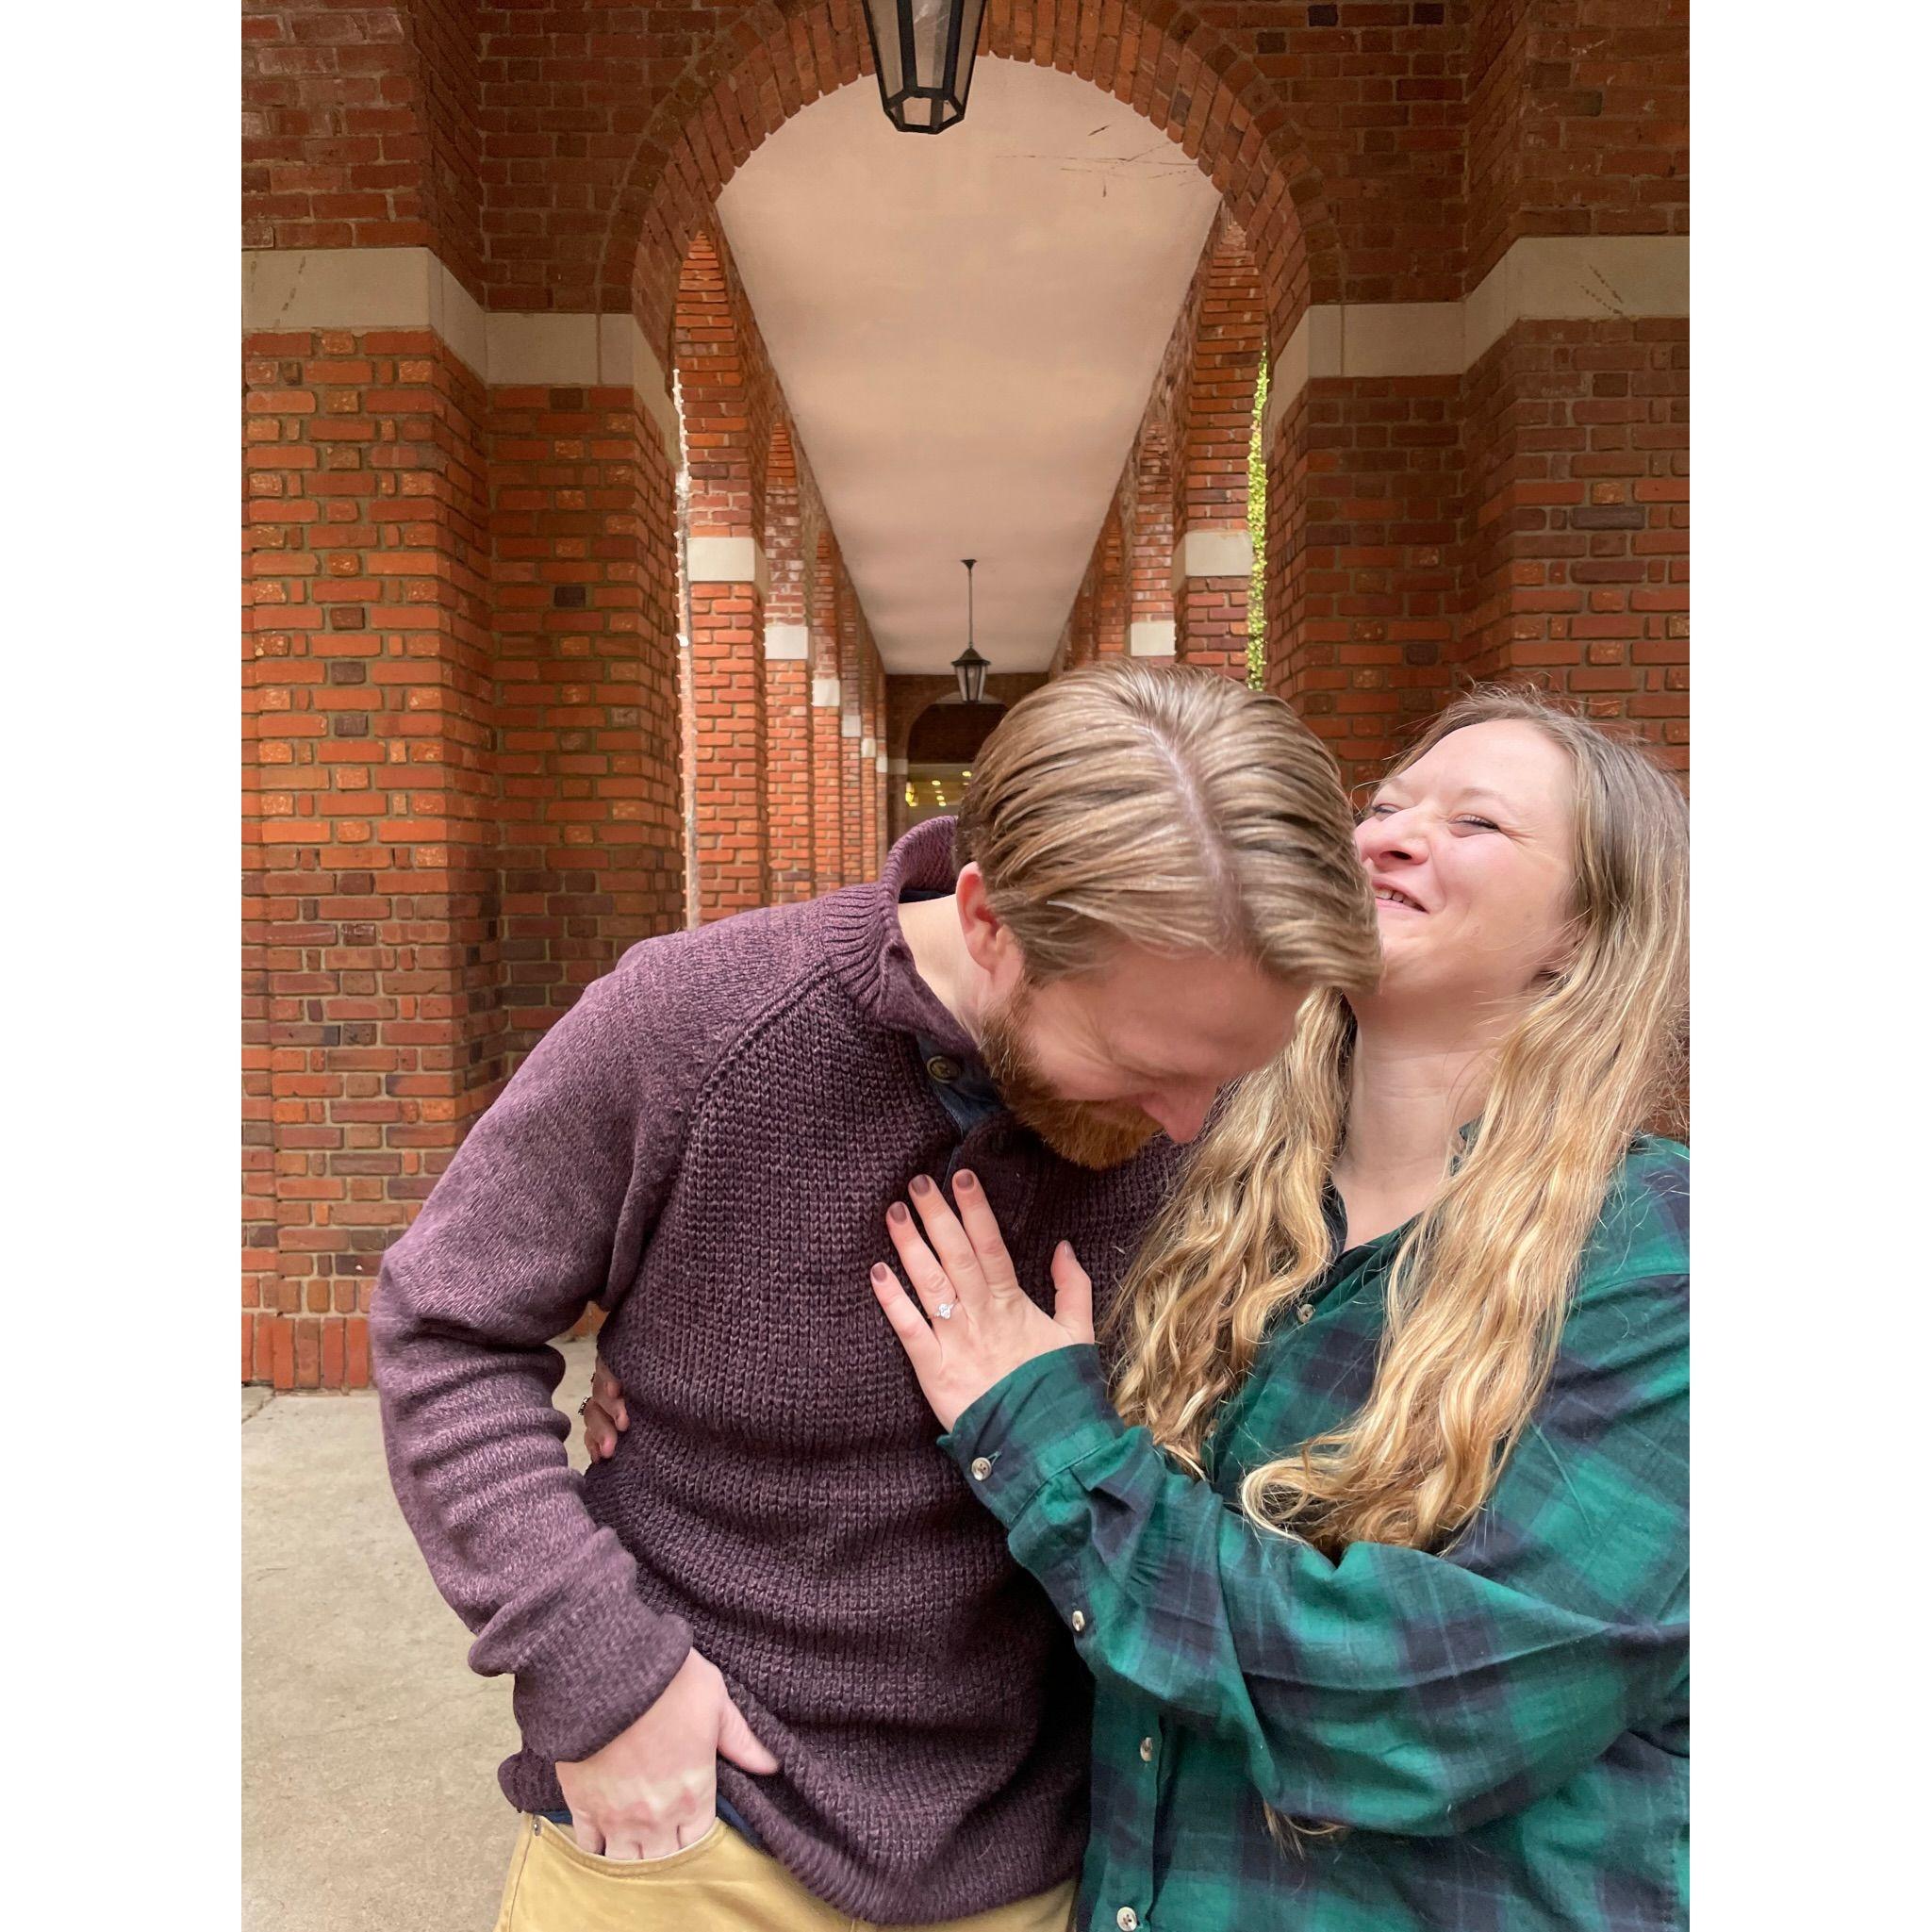 Laughing our way through some of our first pictures of us engaged :)